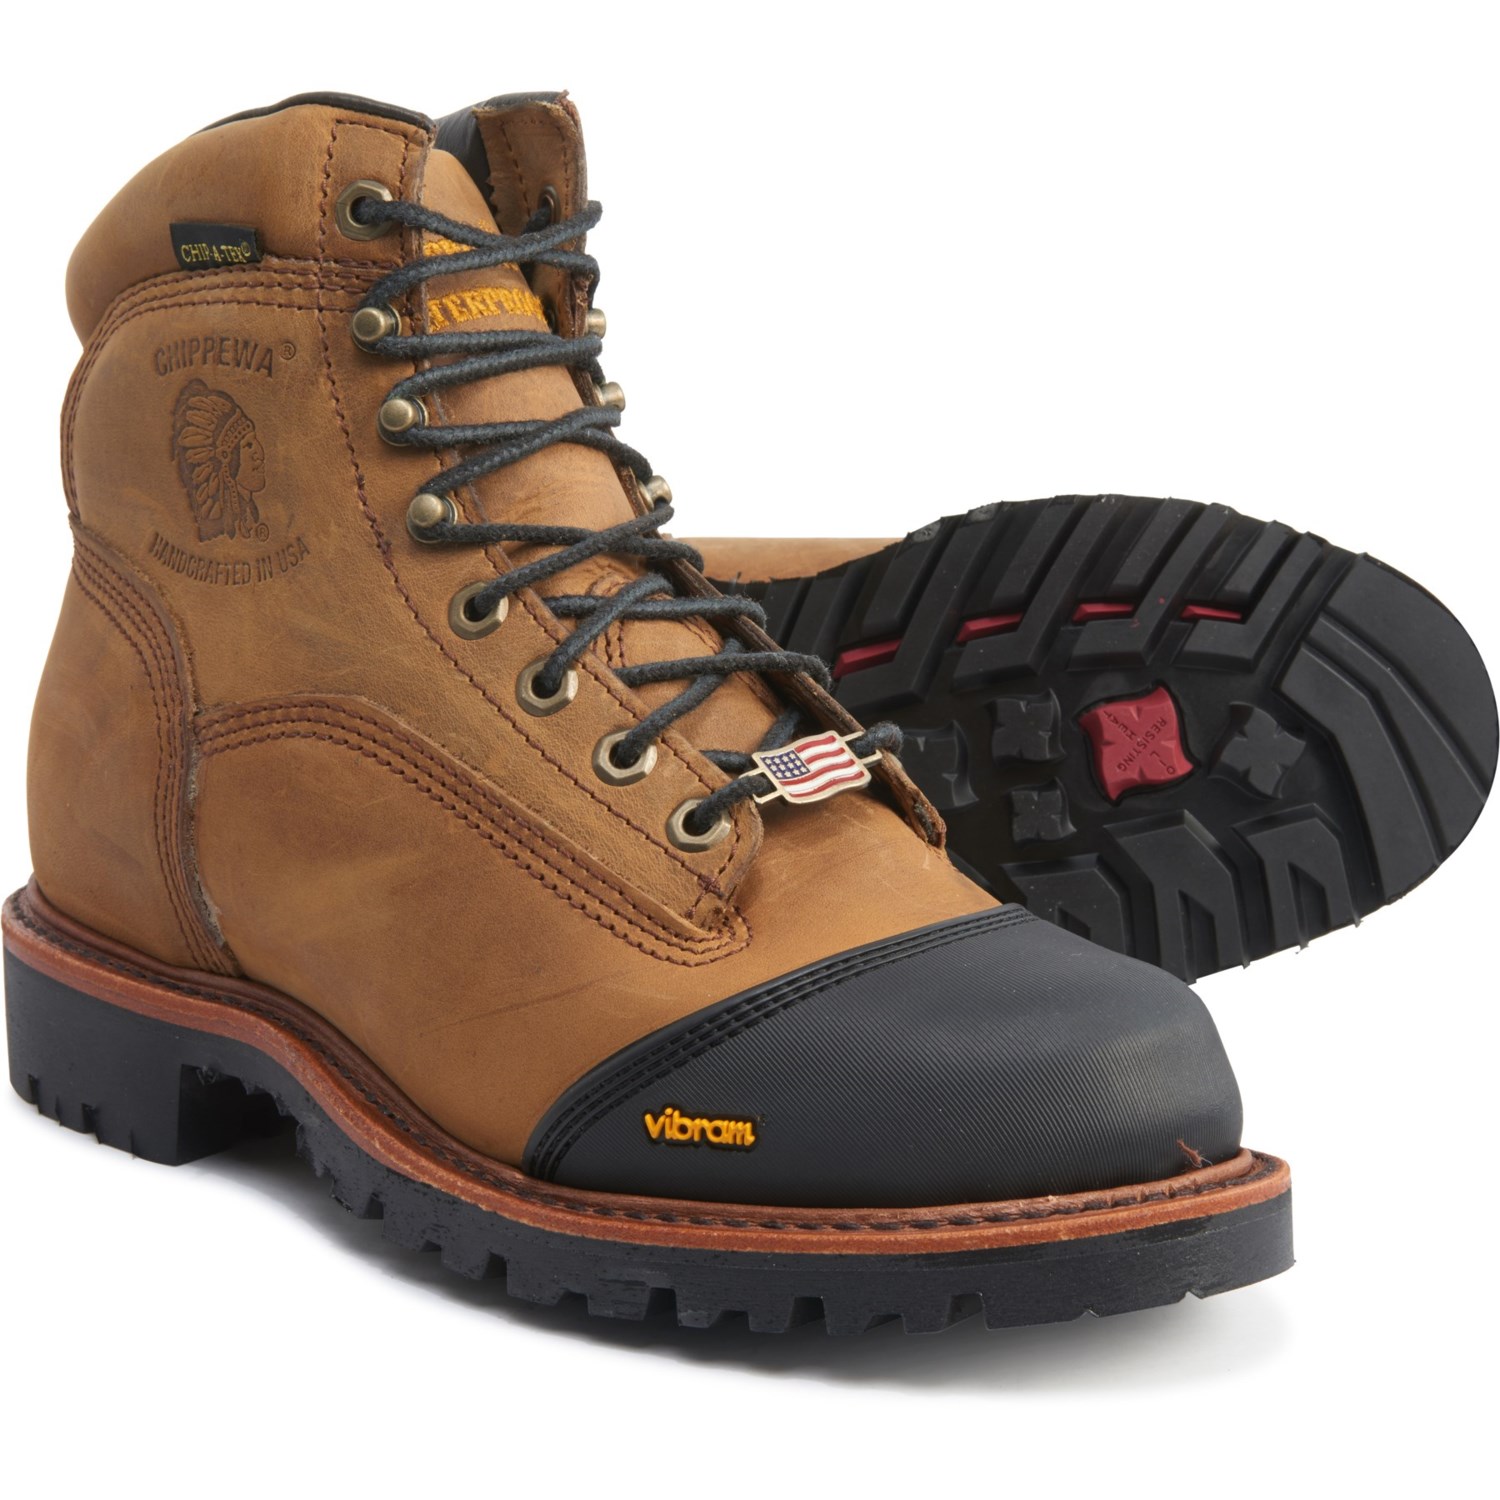 Chippewa 6” Bolger Work Boots (For Men 